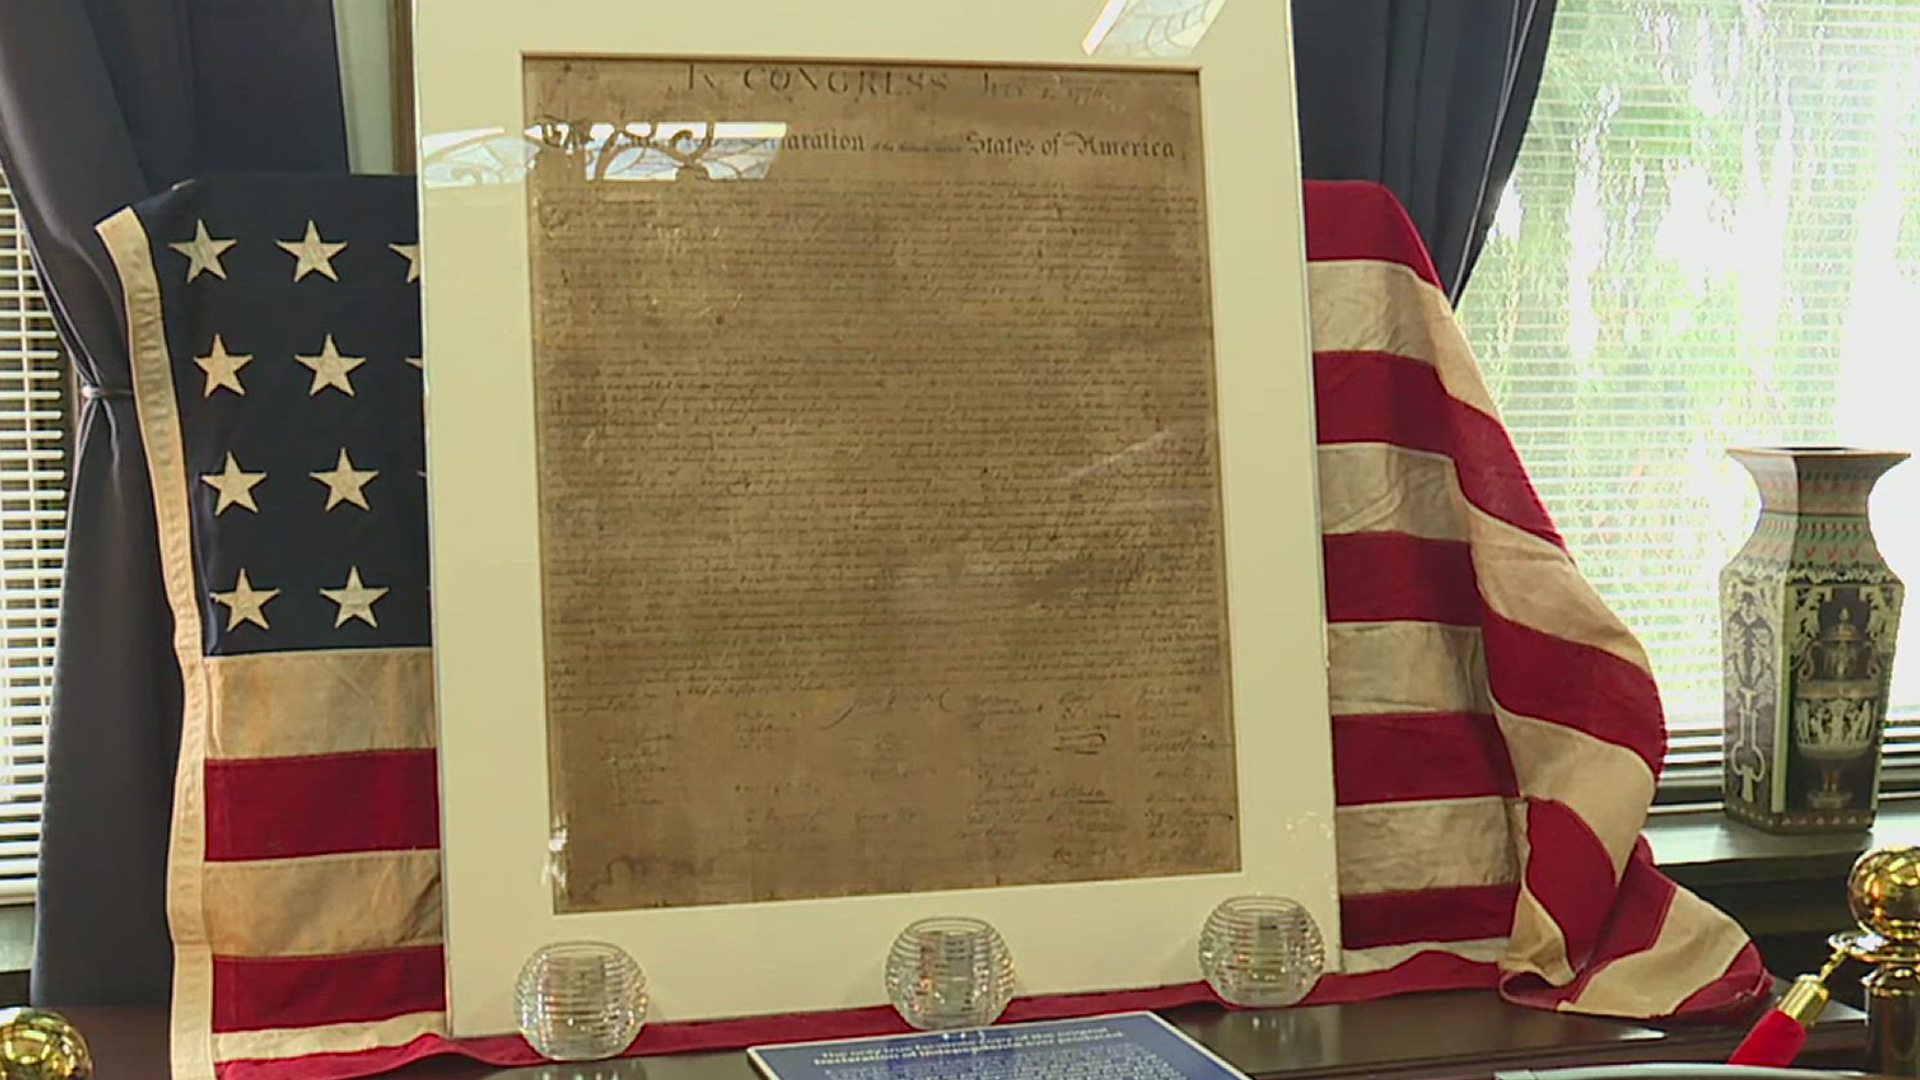 Bought at a flea market decades ago, the document is one of only two known original copies of the Declaration.